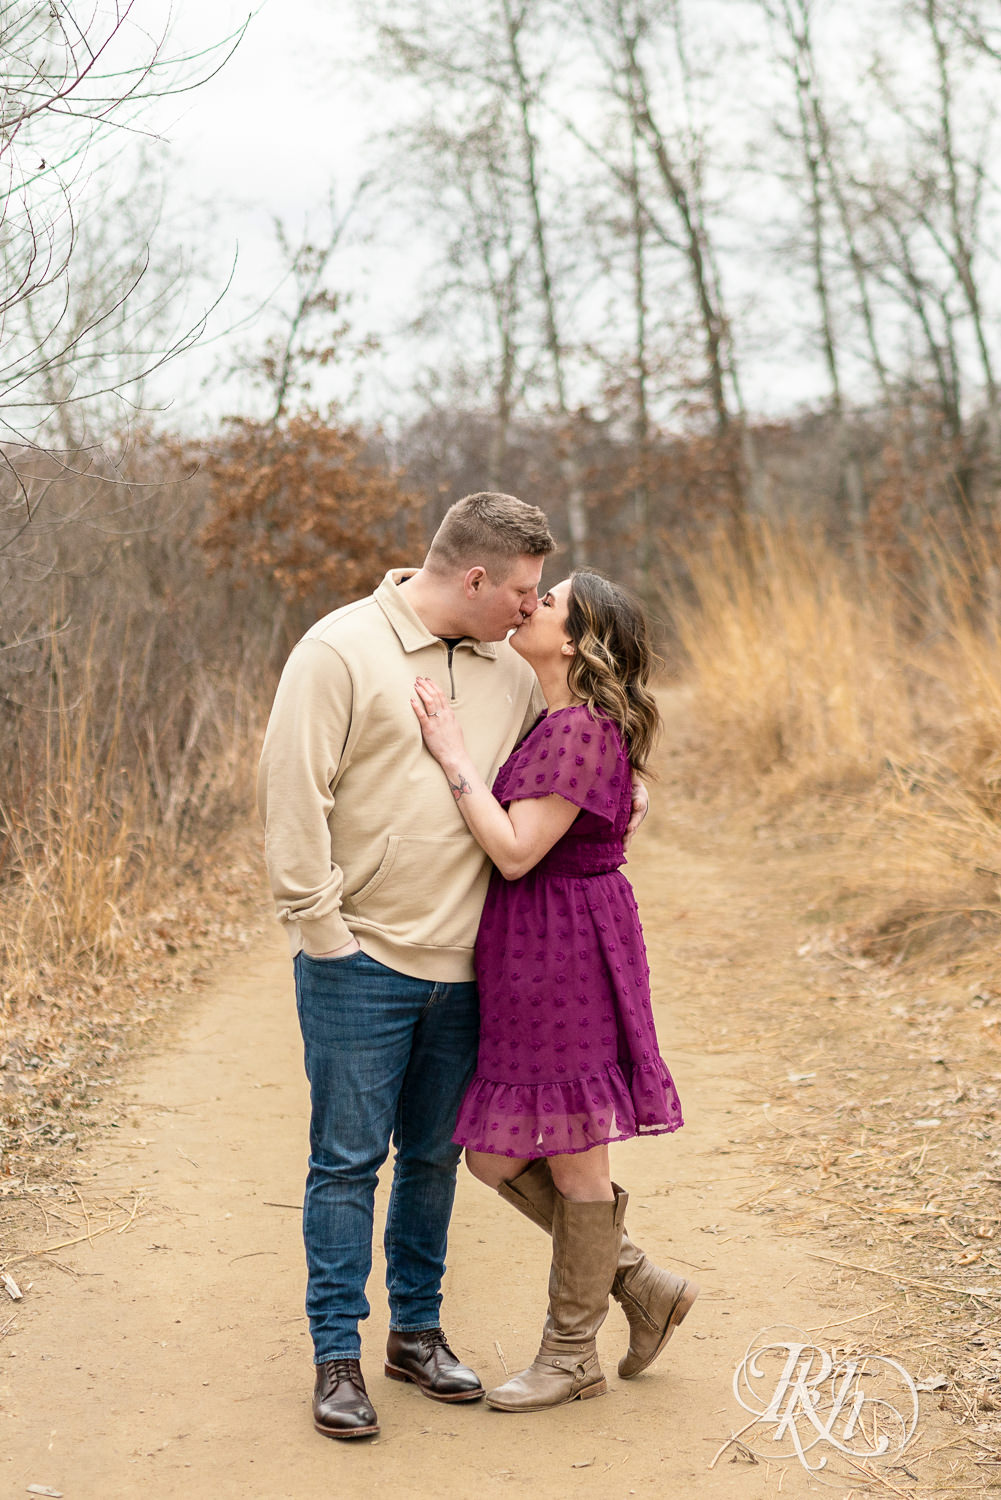 Man in jeans and woman in magenta dress kiss during March engagement photography in Eagan, Minnesota.